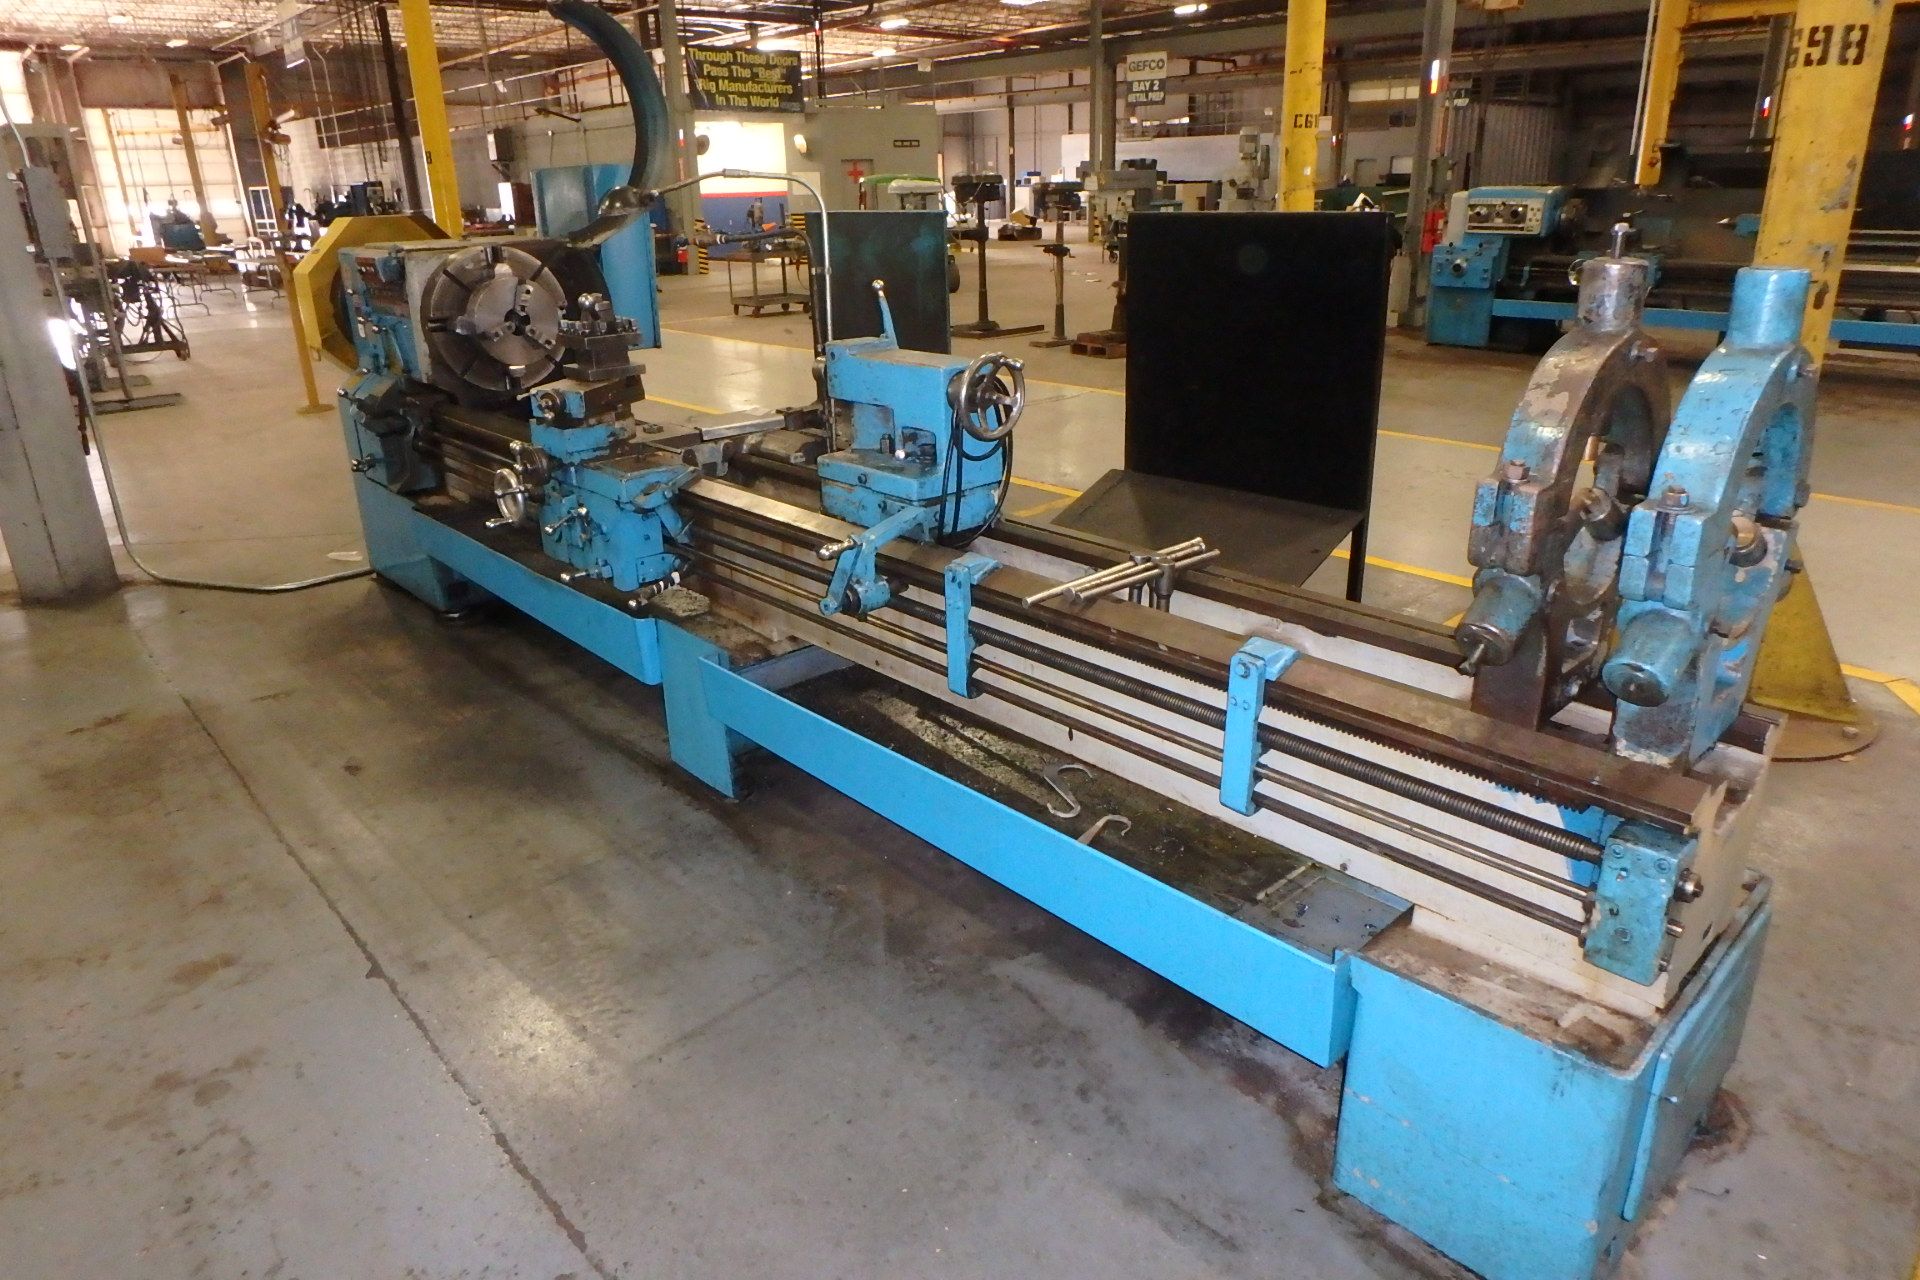 LEBLOND REGAL 24" x 120" Hollow Spindle Lathe, s/n 6HS458, w/ 9" Spindle Hole, 21" Front & Rear - Image 2 of 4